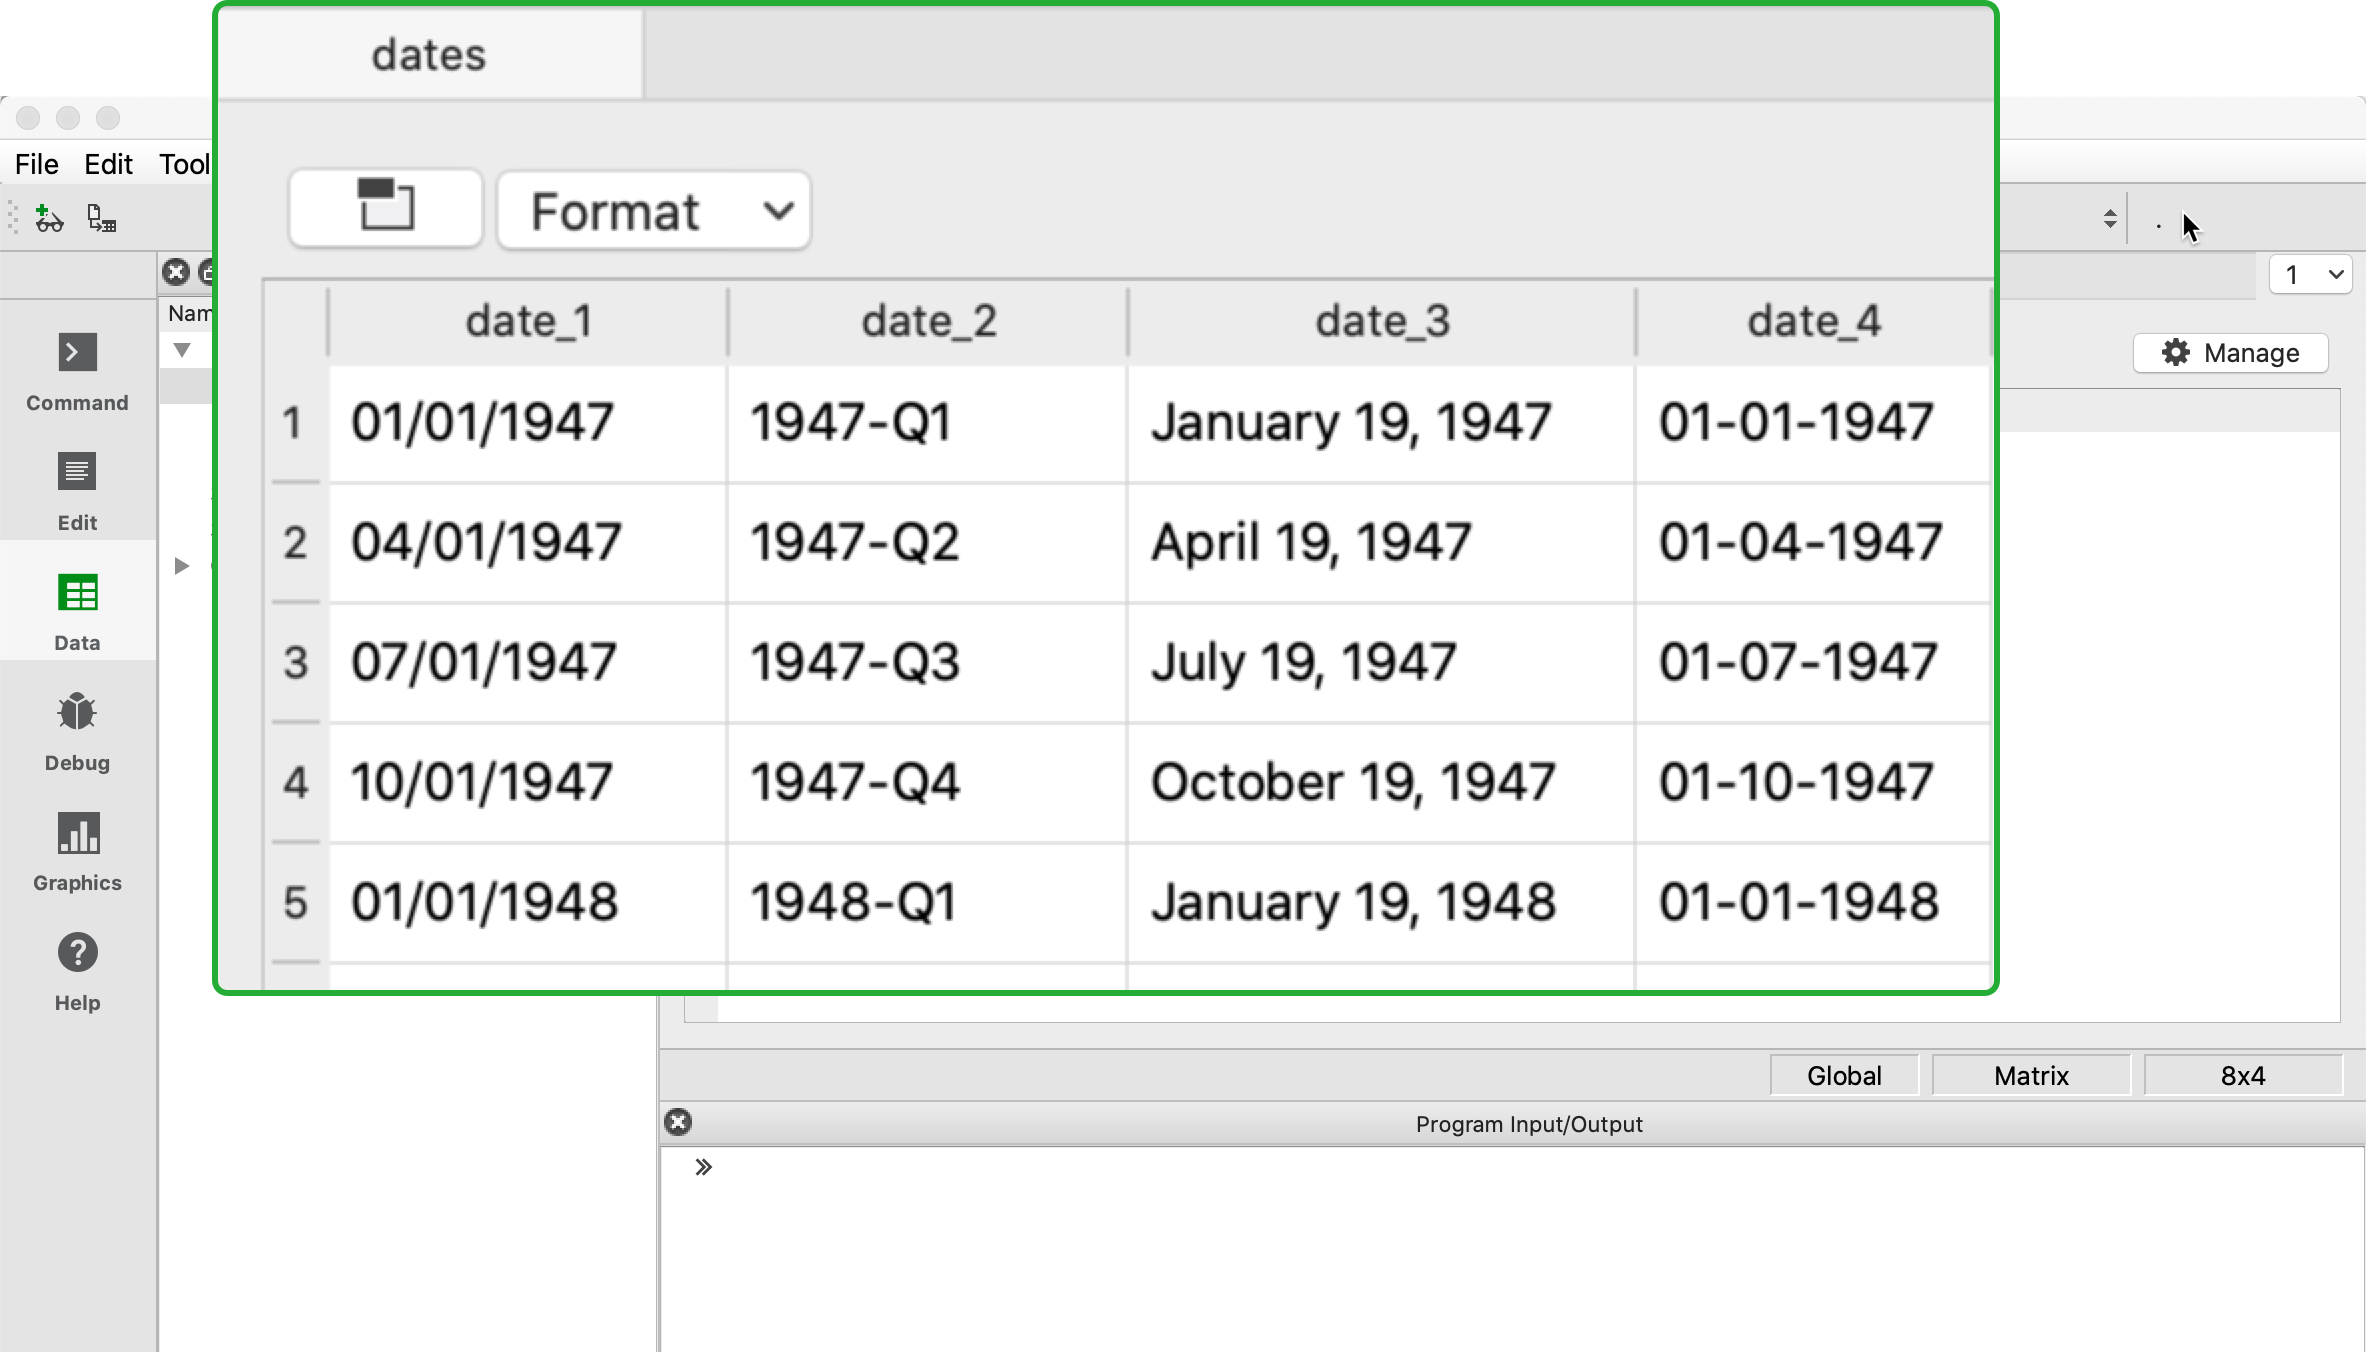 Customize your date display in GAUSS 21